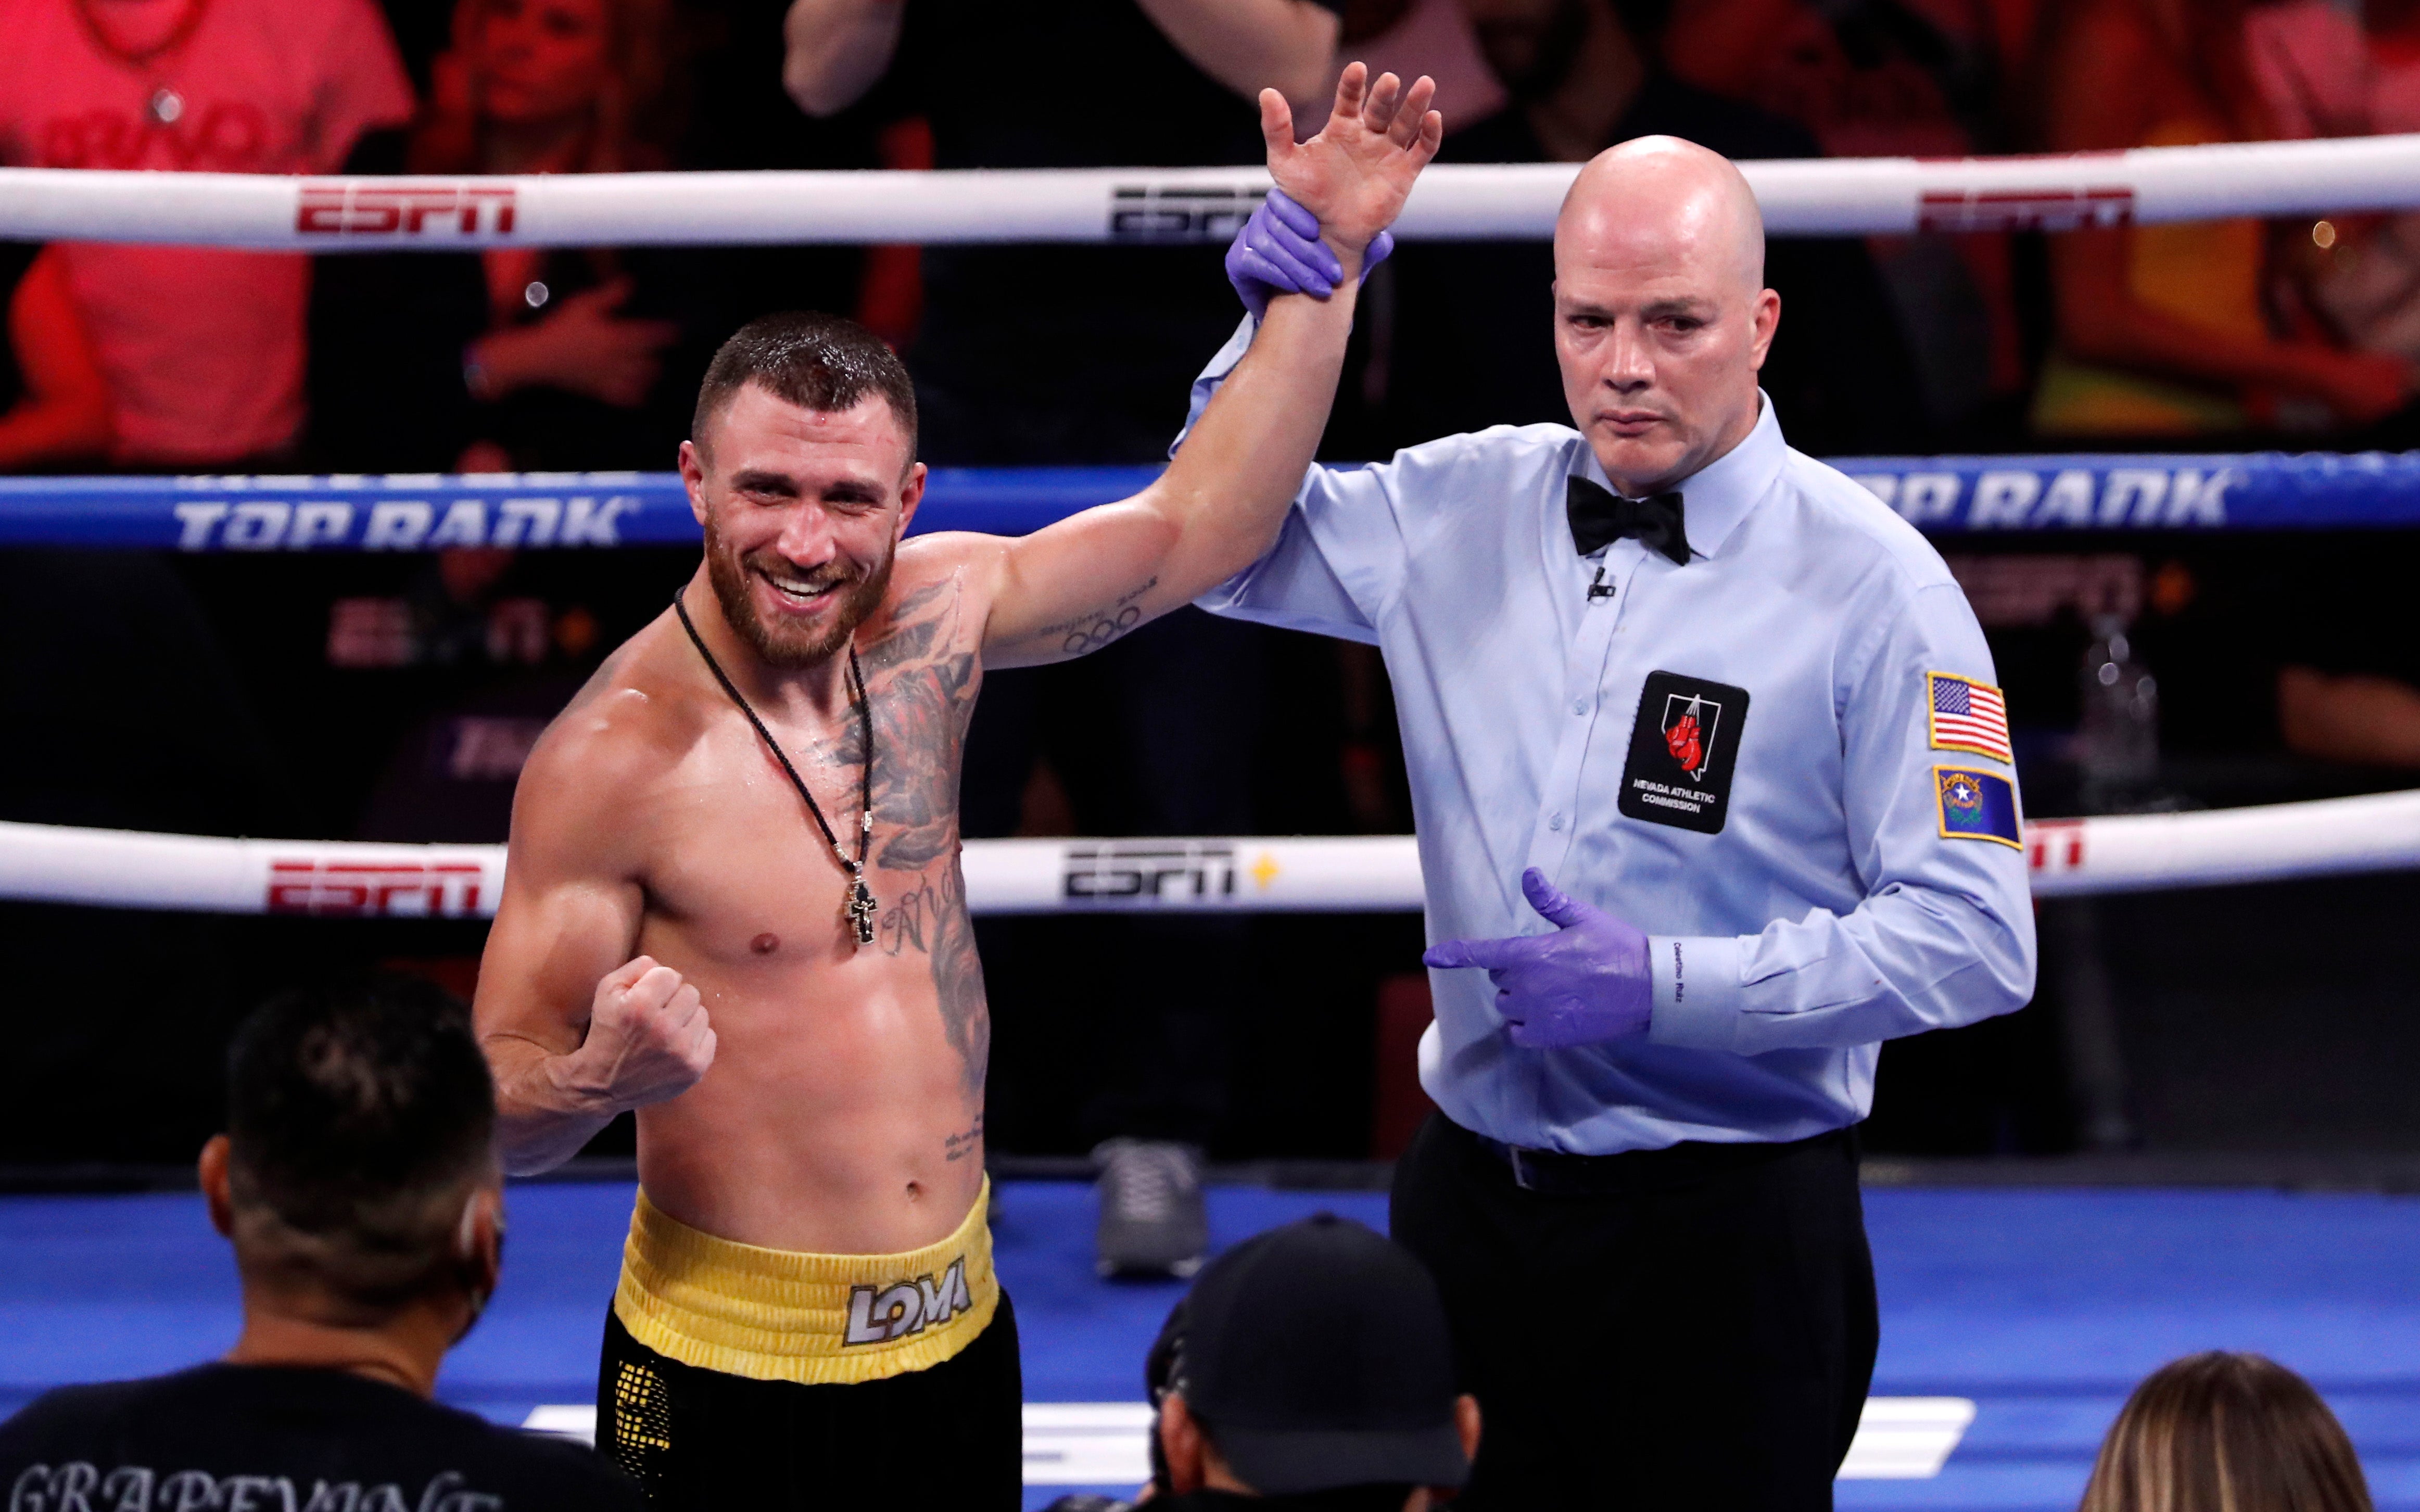 Lomachenko is battling for his titles